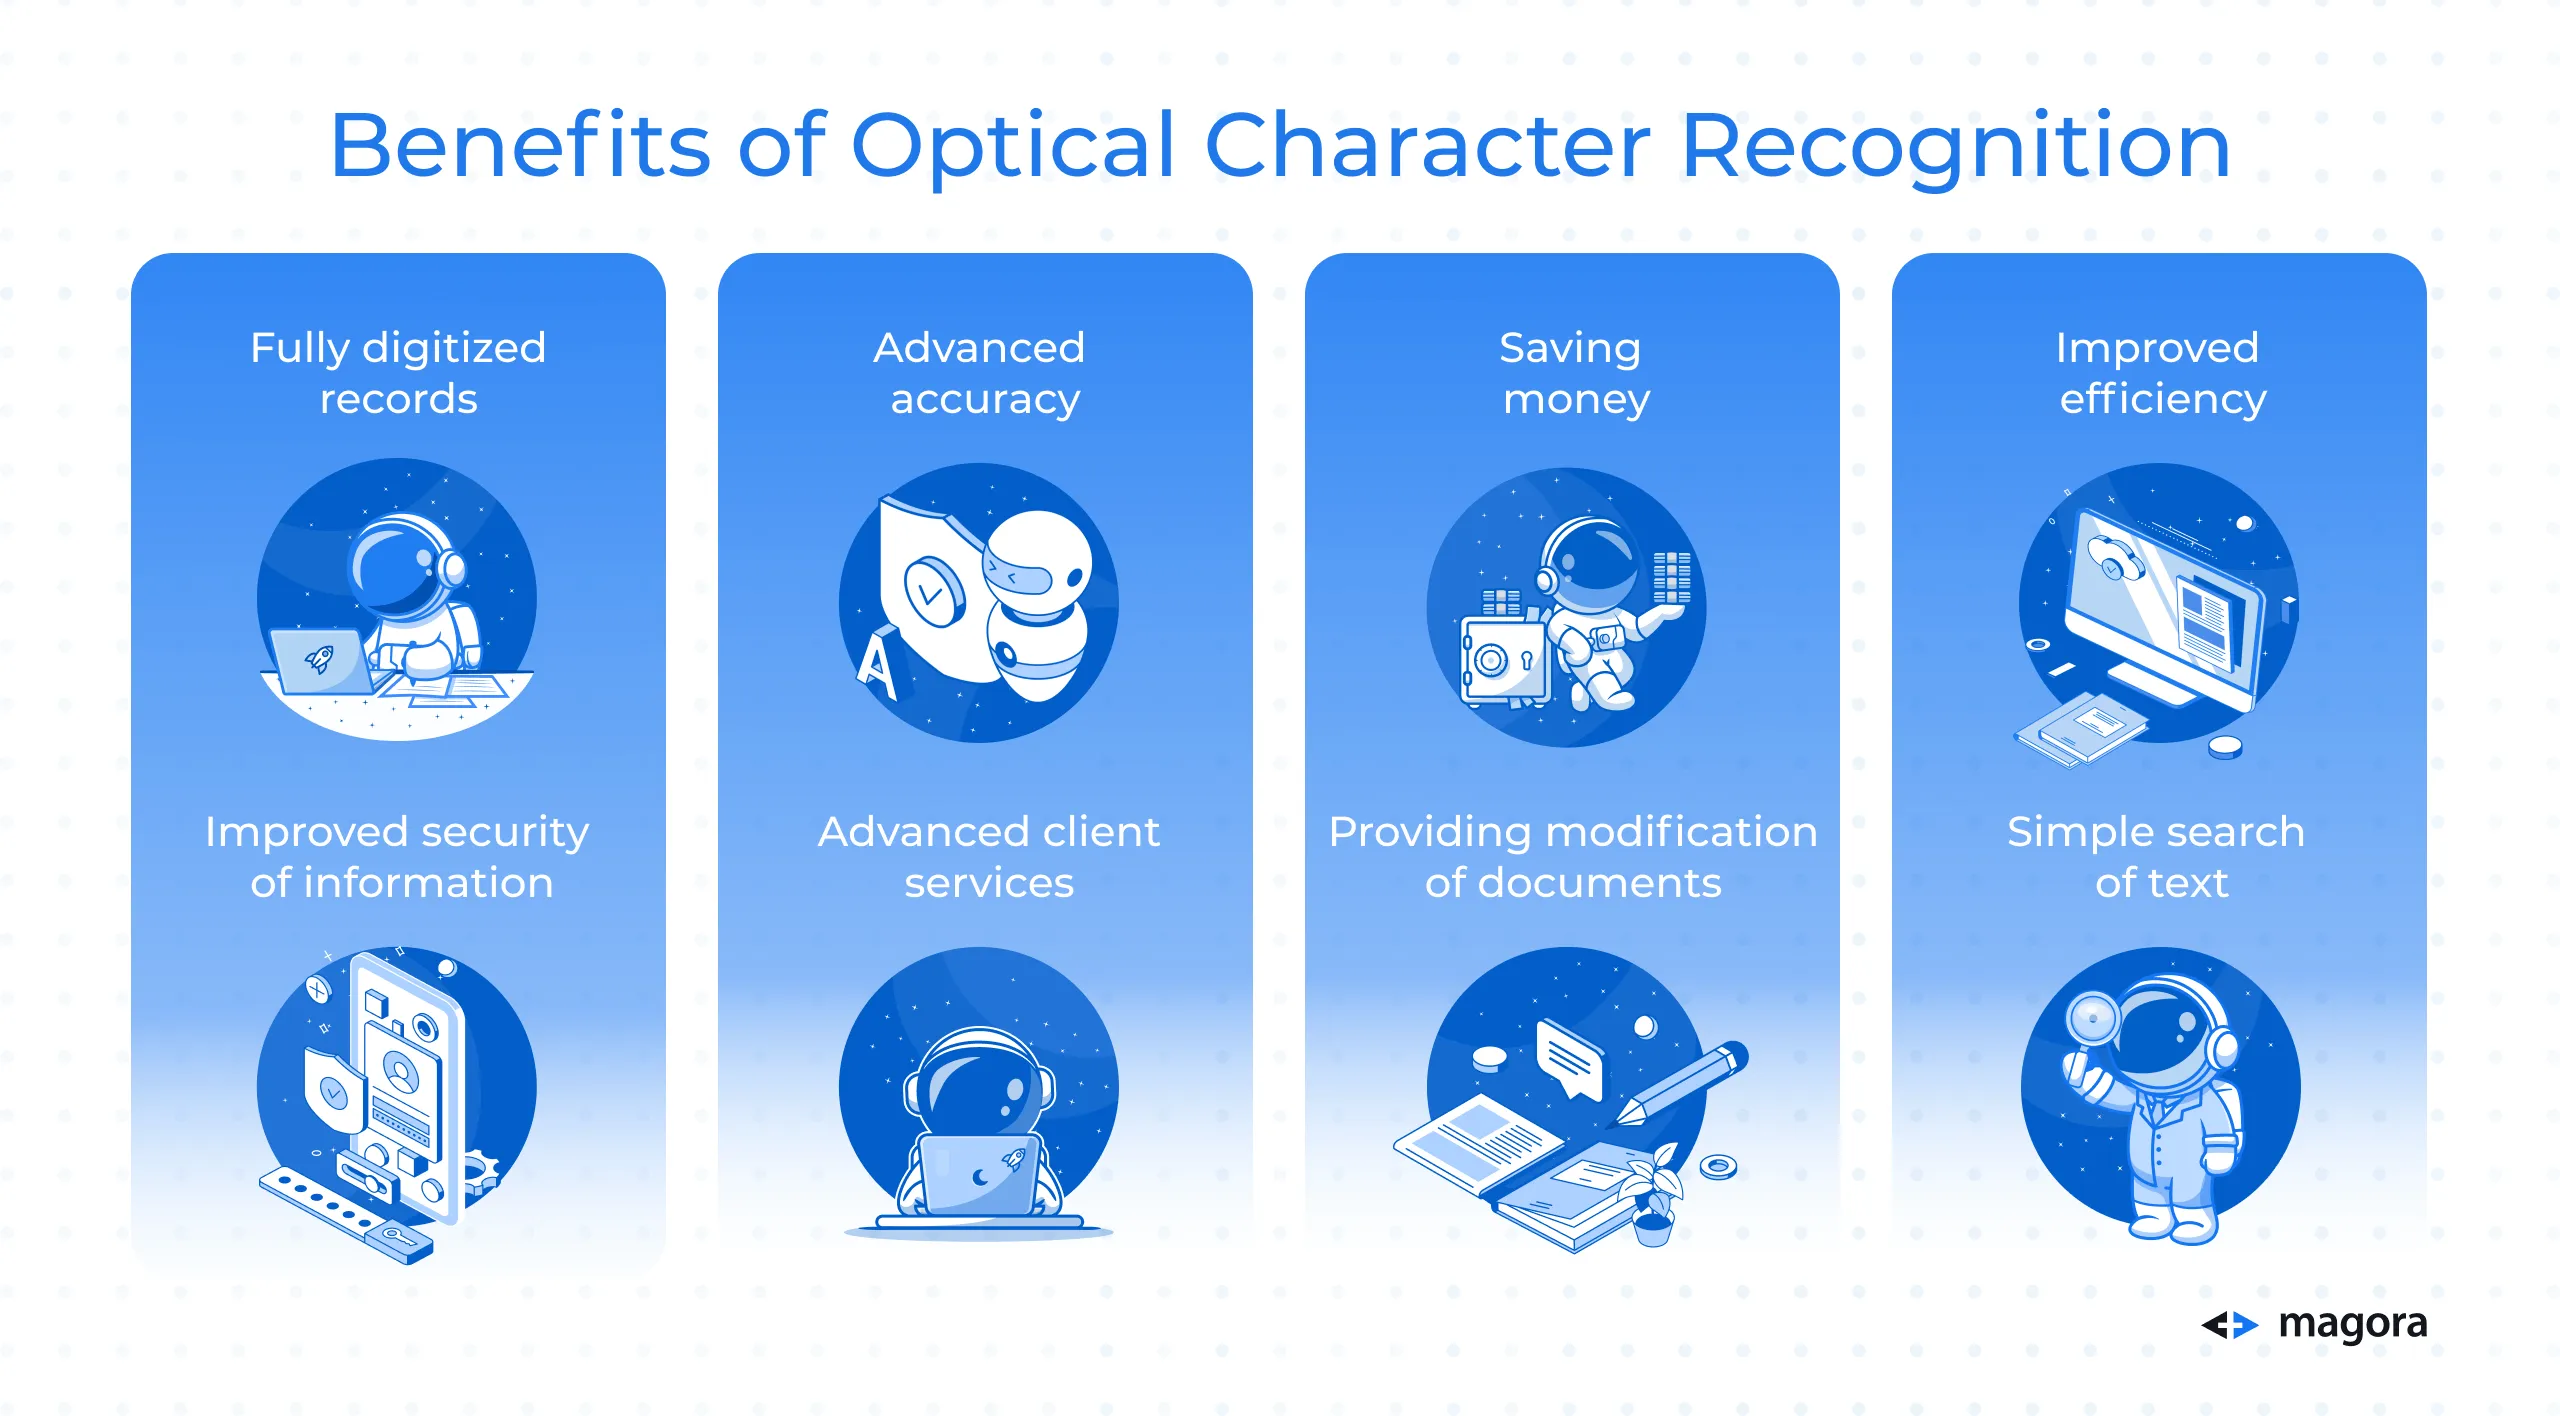 Benefits of Optical Character Recognition